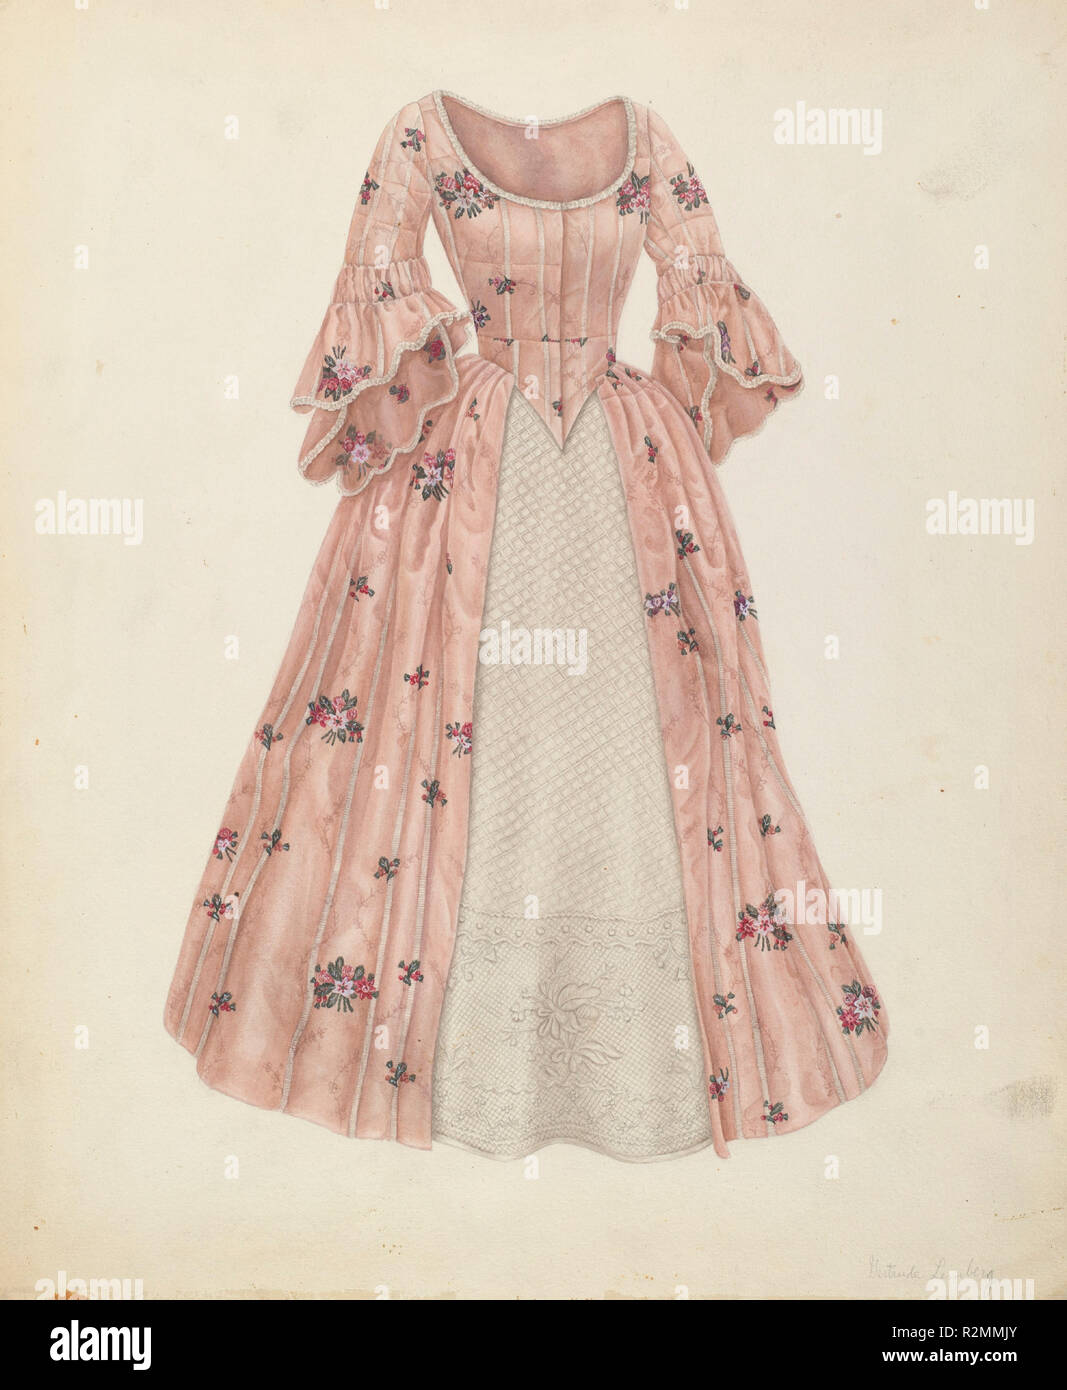 Petticoat Dress. Dated: c. 1941. Dimensions: overall: 45.6 x 36.7 cm (17 15/16 x 14 7/16 in.). Medium: watercolor and graphite on paper. Museum: National Gallery of Art, Washington DC. Author: Gertrude Lemberg. Stock Photo